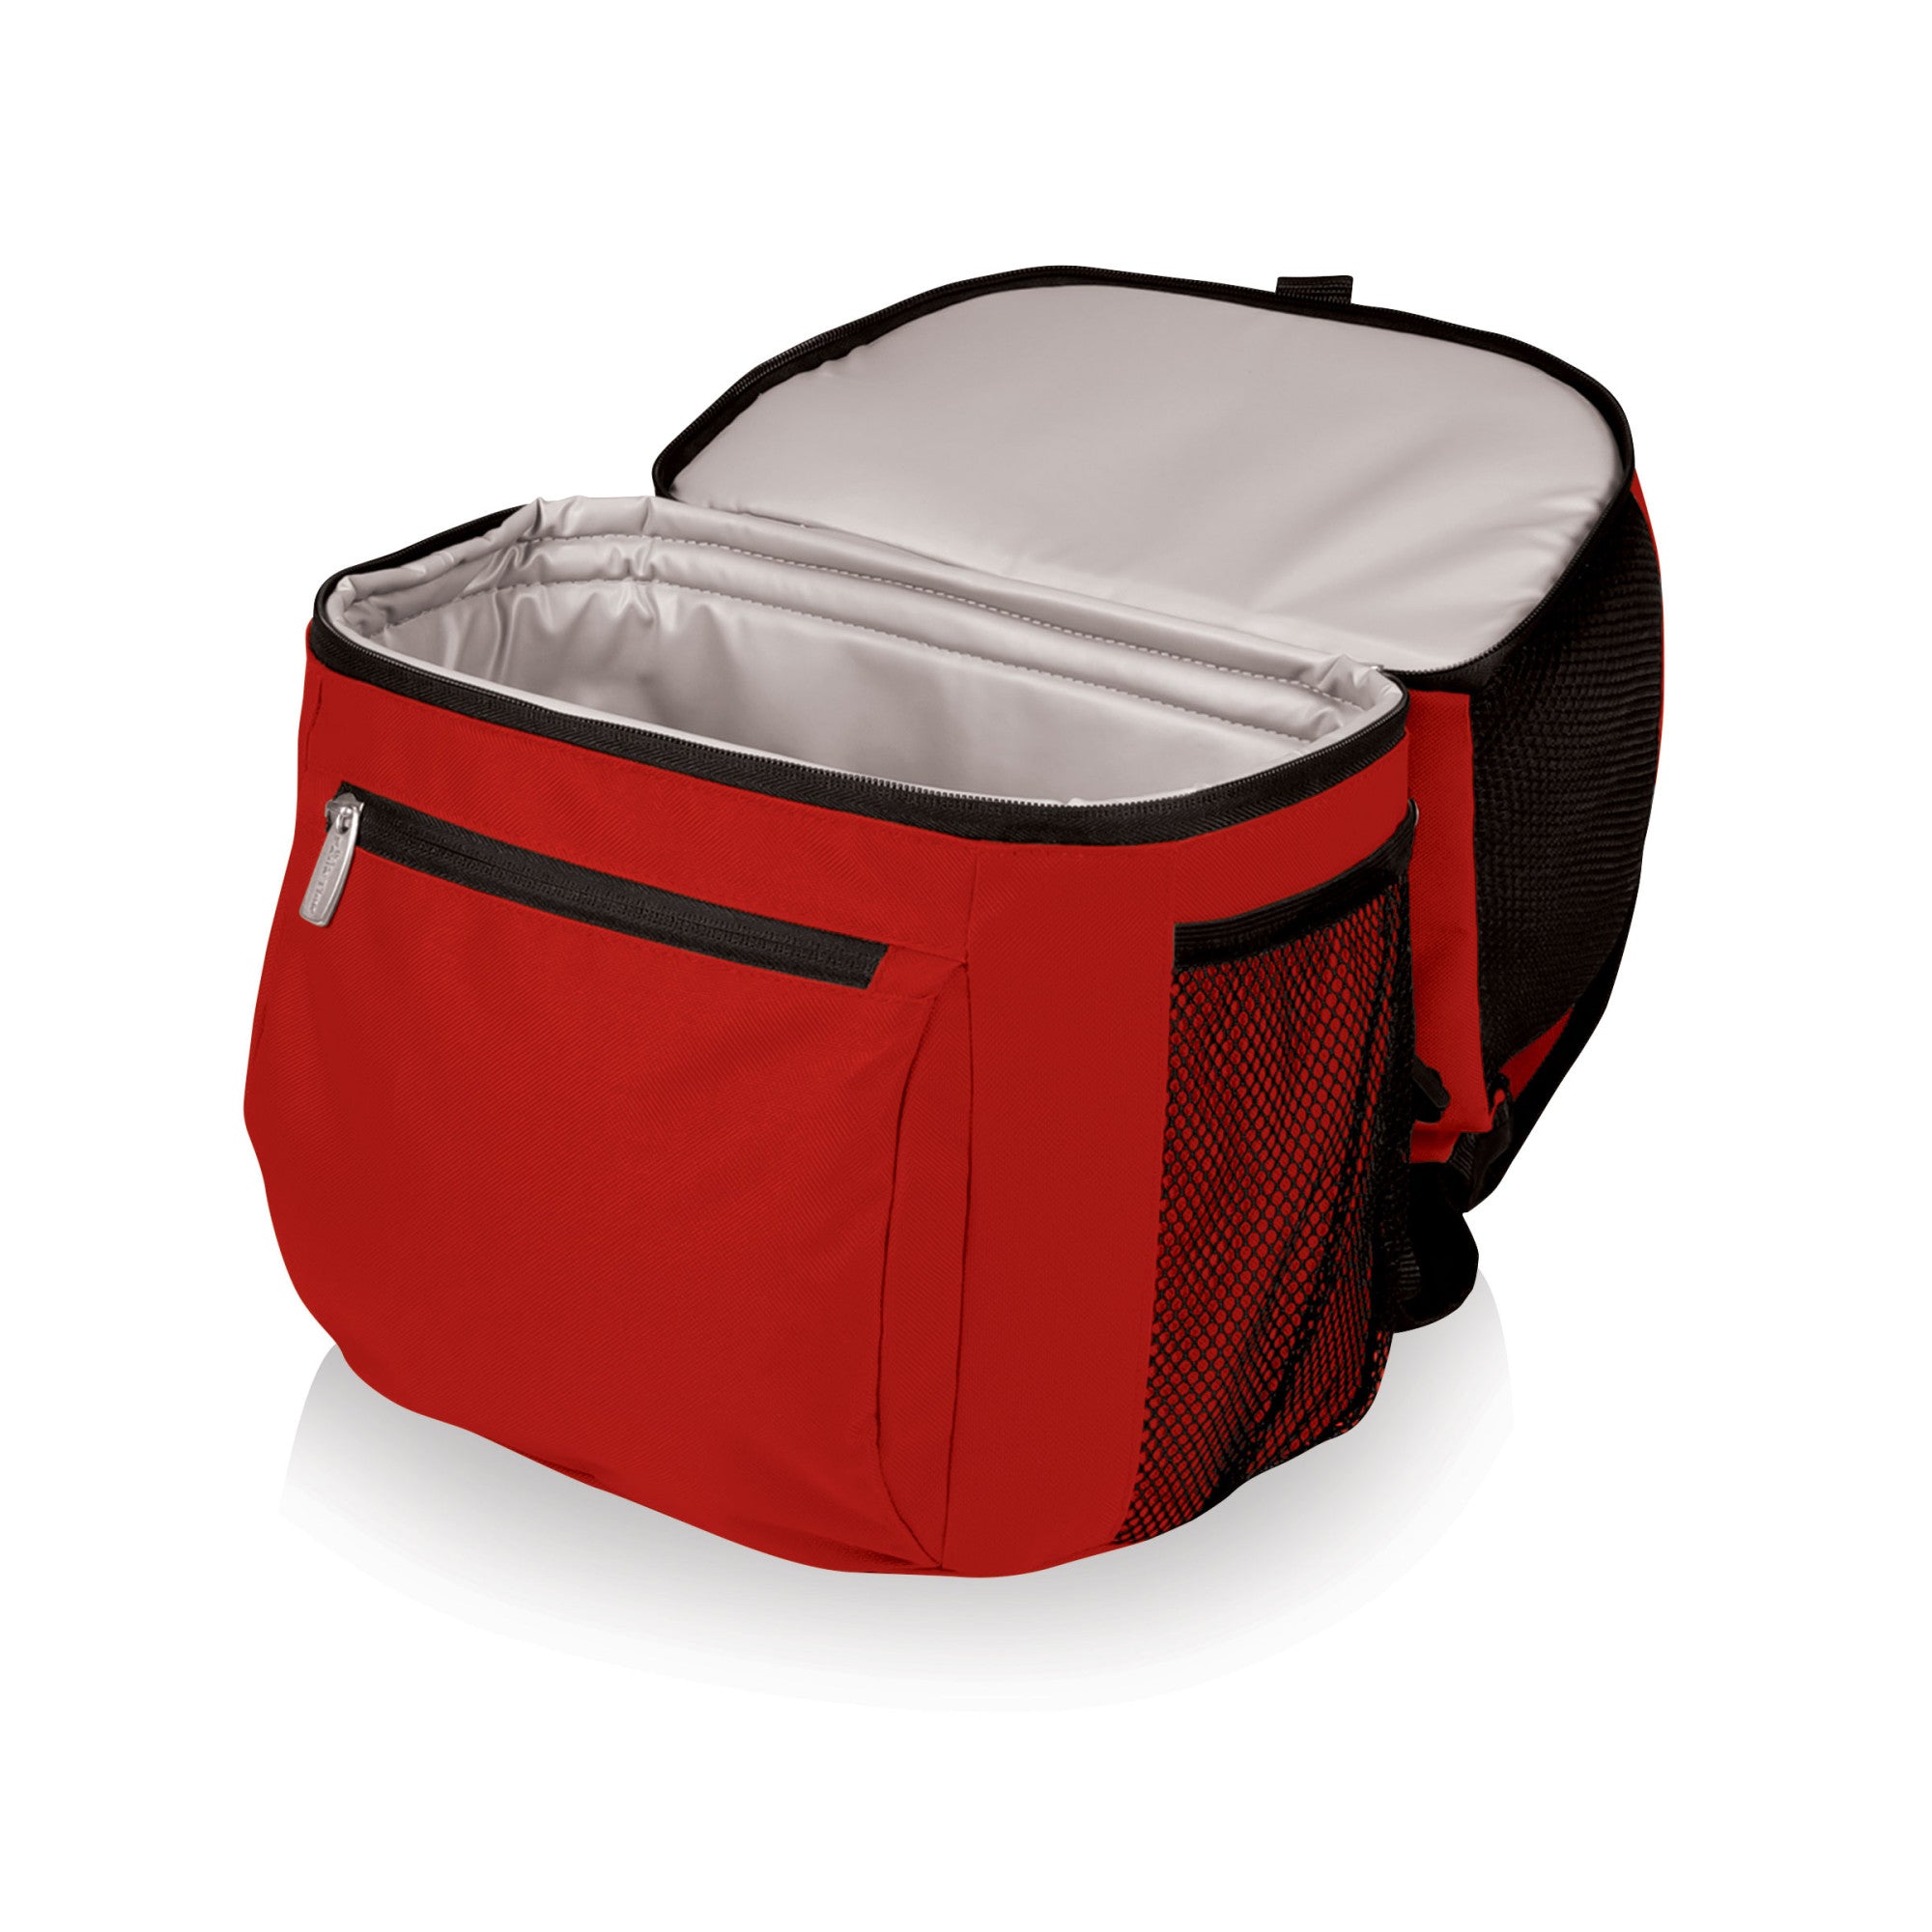 Picnic Time San Francisco 49ers Insulated Beverage Cooler